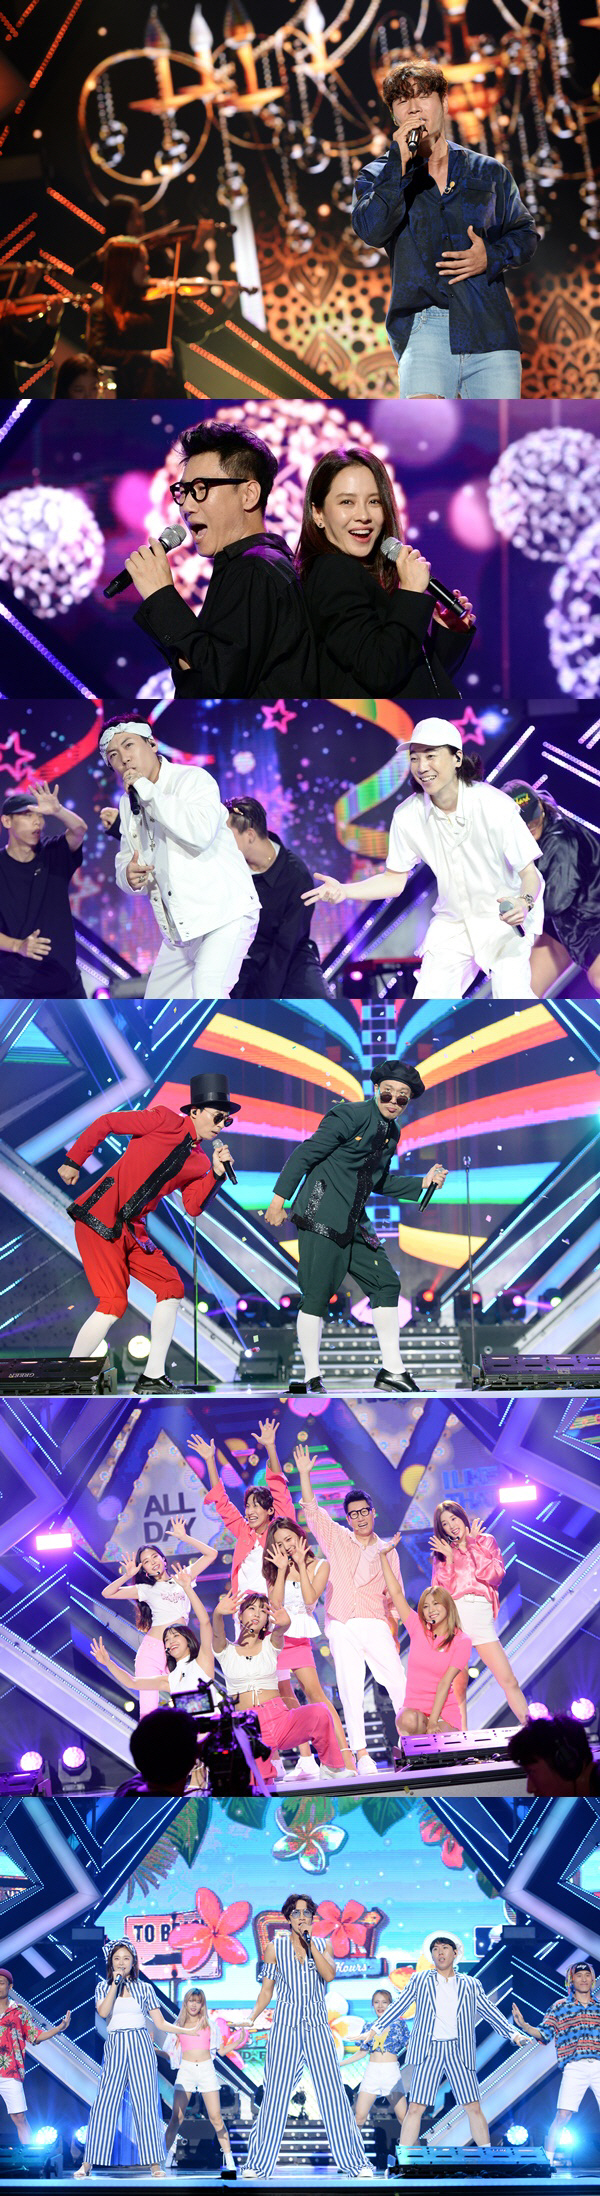 On SBS Running Man, which will be broadcast on the 15th (Sun), the second story of the 9th anniversary fan meeting Running District will be held, and the Collabo stage with the artists of the Choi Jing Award will be released.In addition, Kim Jong-kook shows off his creepy singing skills for fans by singing the movie Aladdin OST Speechless, a topic song, in the aspect of 24th Veteran singer rather than Kim Jong-kook.In addition, Lee Kwang-soo & Jeon So-min & Yang Se-chan Running Man youngest trio, which has been proud of their strong friendship within the team, has formed a new group for fans and presents unexpected surprise performance and amazing fan service.Meanwhile, while the sexy dance of Dumb Sisters was foreseen in the group dance, the two actresses also showed off their tremendous beauty and stole fans attention.The couple song of Yoo Jae-Suk & Haha, who won the duet stage with penalties, is expected to be a big topic by bringing explosive field reaction with dance and colorful performance reminiscent of Michael Jackson.In particular, the stage with the domestic Choi Jing awards The Artists is also unveiled. The Collabo stage, which shines the fan meeting stage with various attractions filled with individuality of each team, can be seen at Running Man broadcasted at 5 pm on Sunday, 15th.